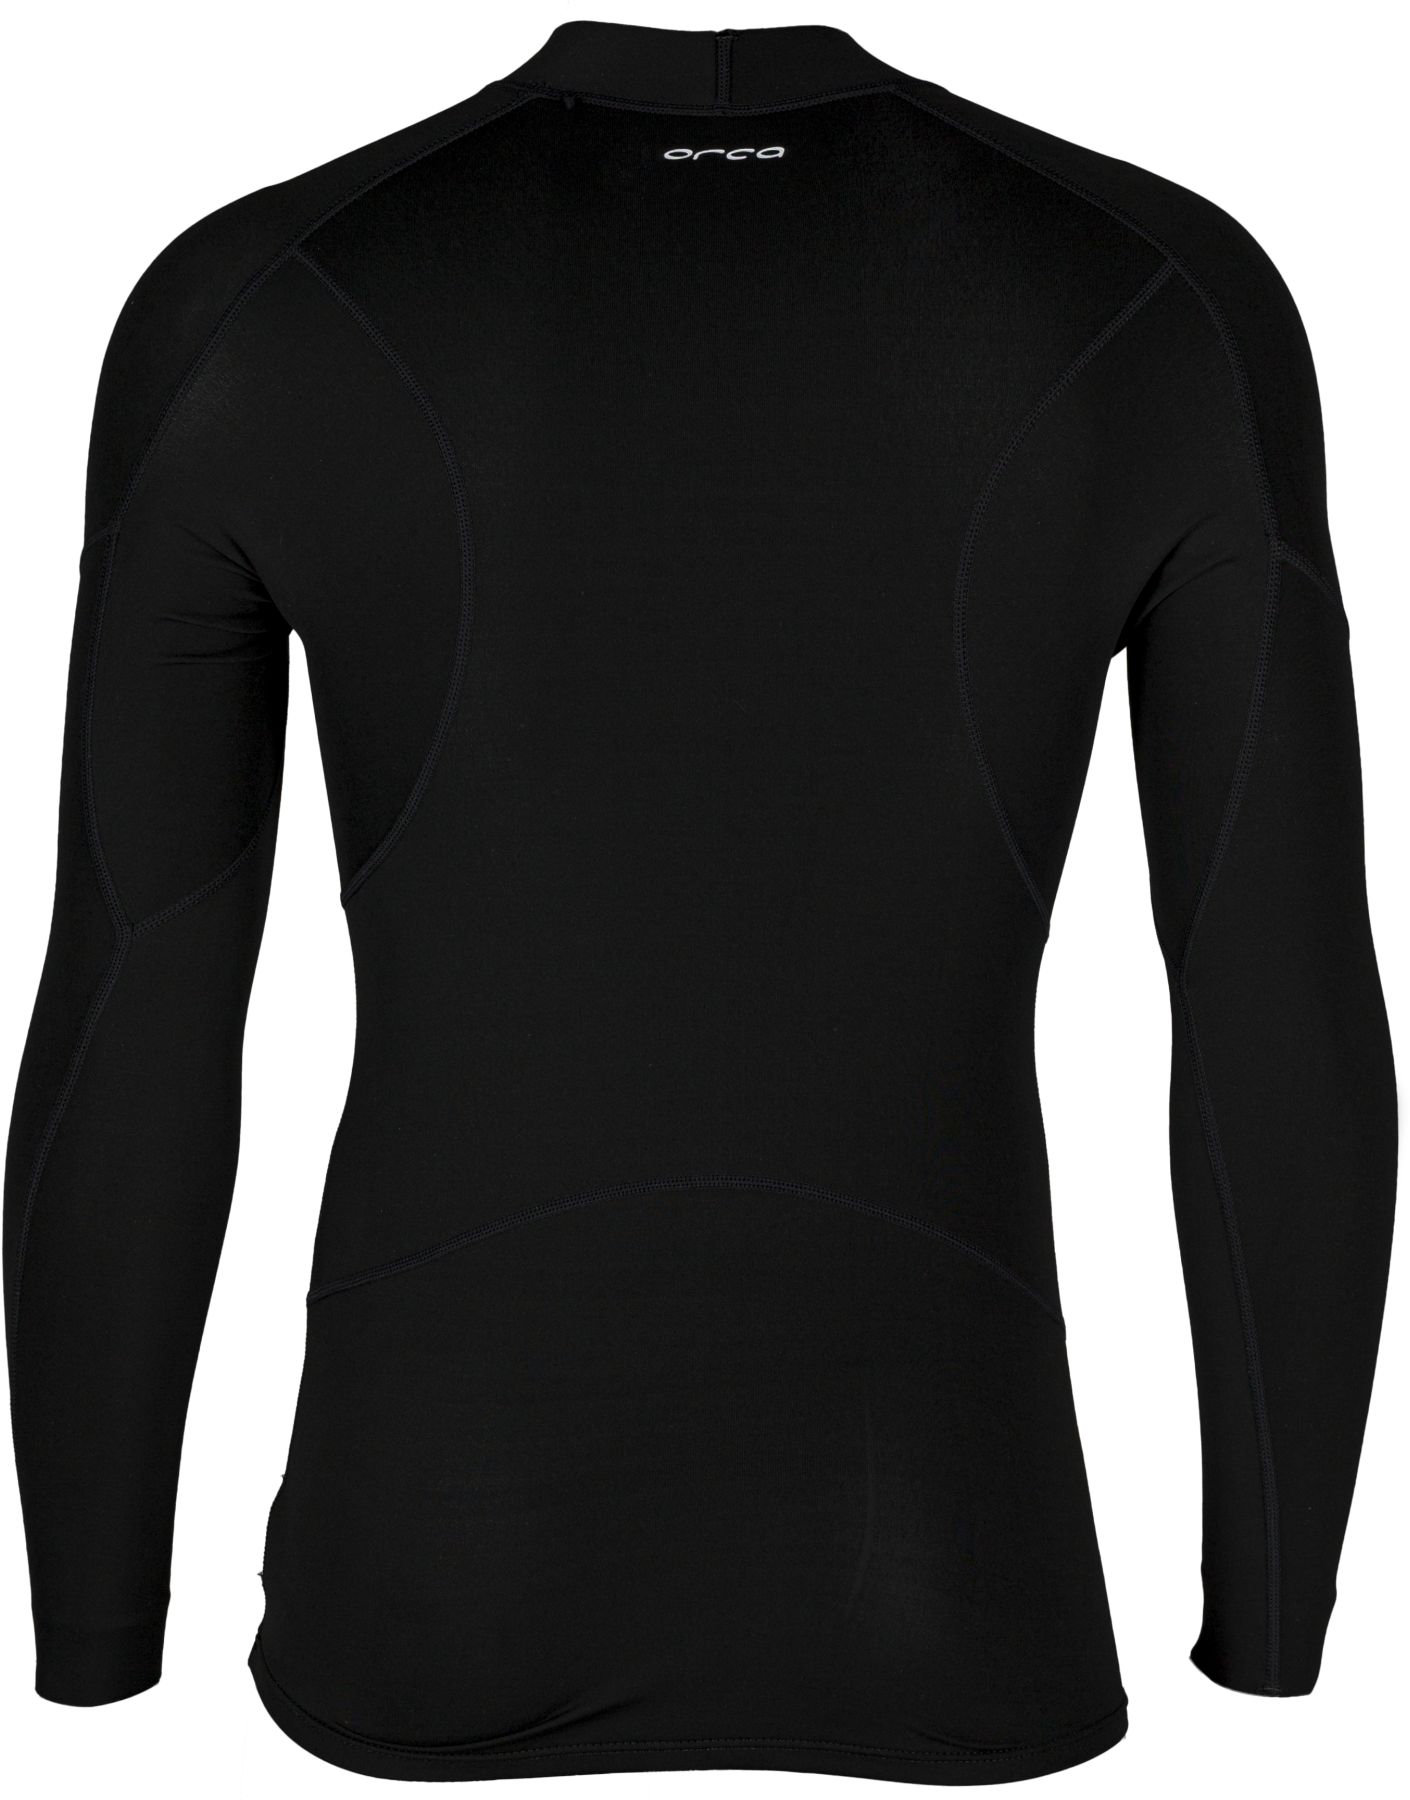 Orca Openwater Neoprene Base Layer - Tri & Openwater Wetsuits - Cycle ...